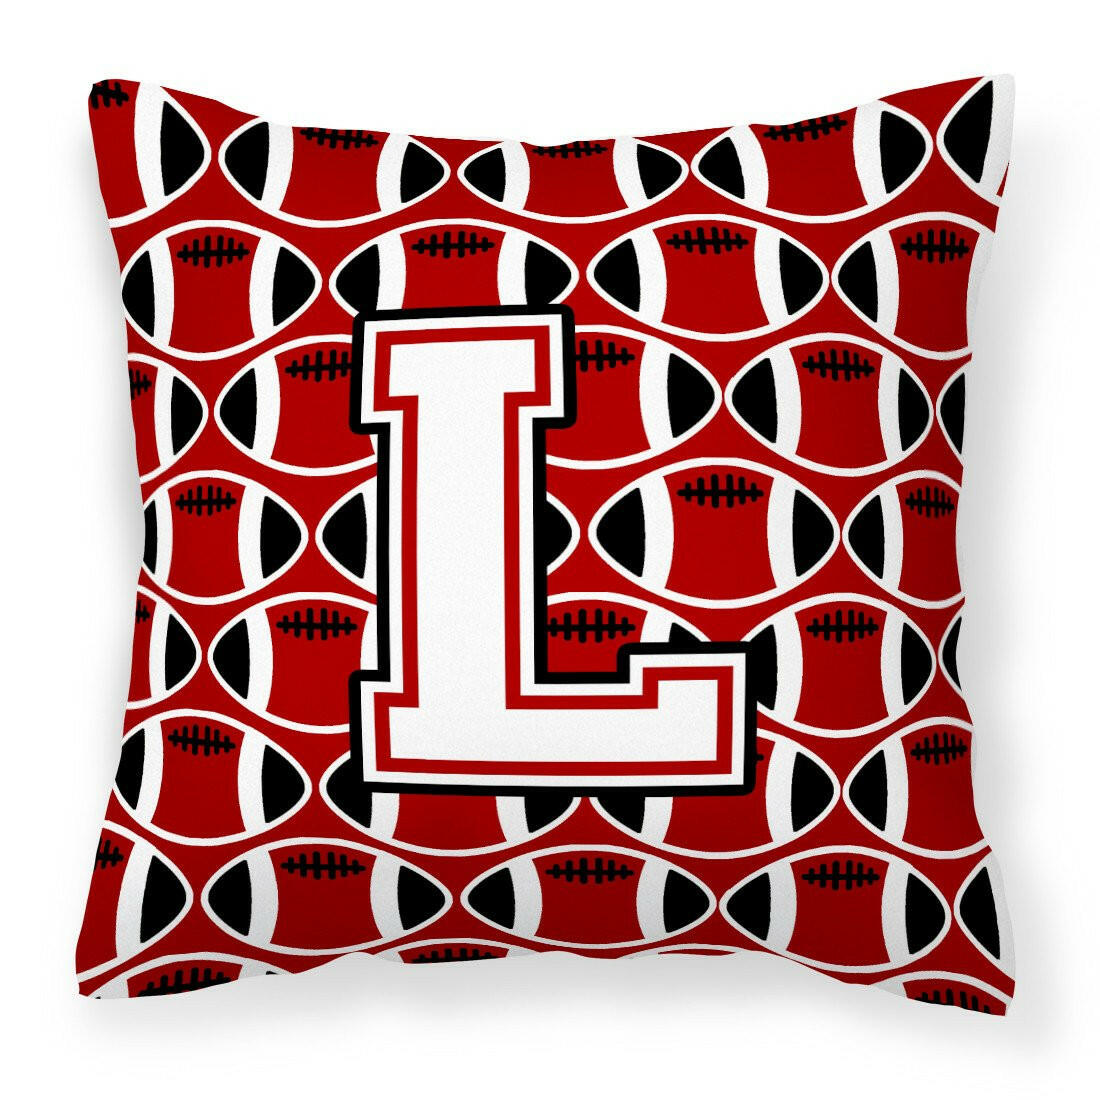 Letter L Football Cardinal and White Fabric Decorative Pillow CJ1082-LPW1414 by Caroline's Treasures